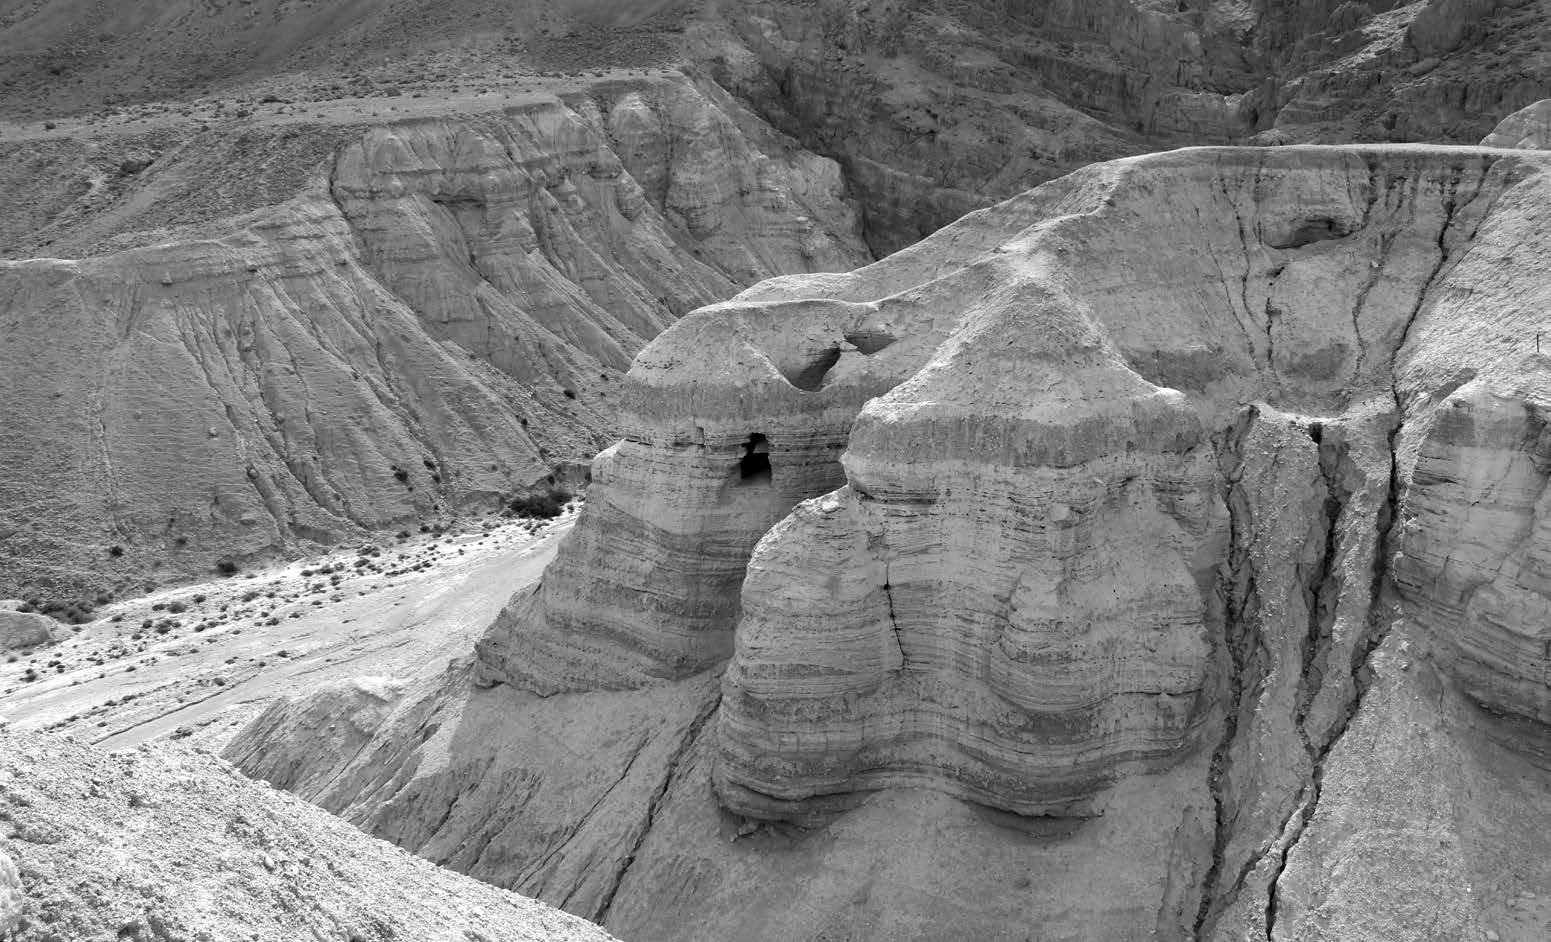 Qumran Cave 4. Courtesy of Lincoln H. Blumell.